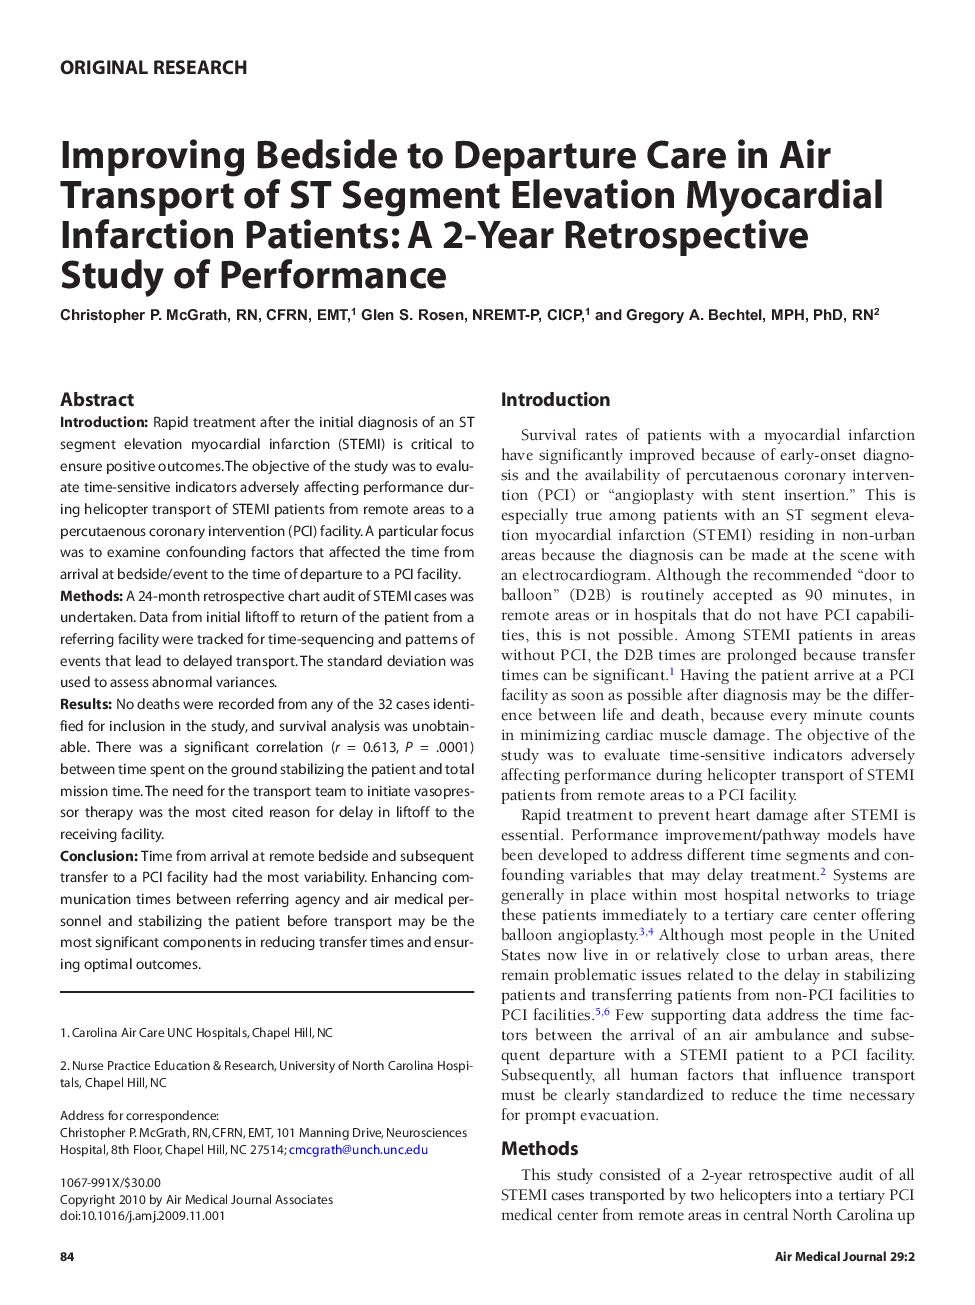 Improving Bedside to Departure Care in Air Transport of ST Segment Elevation Myocardial Infarction Patients: A 2-Year Retrospective Study of Performance